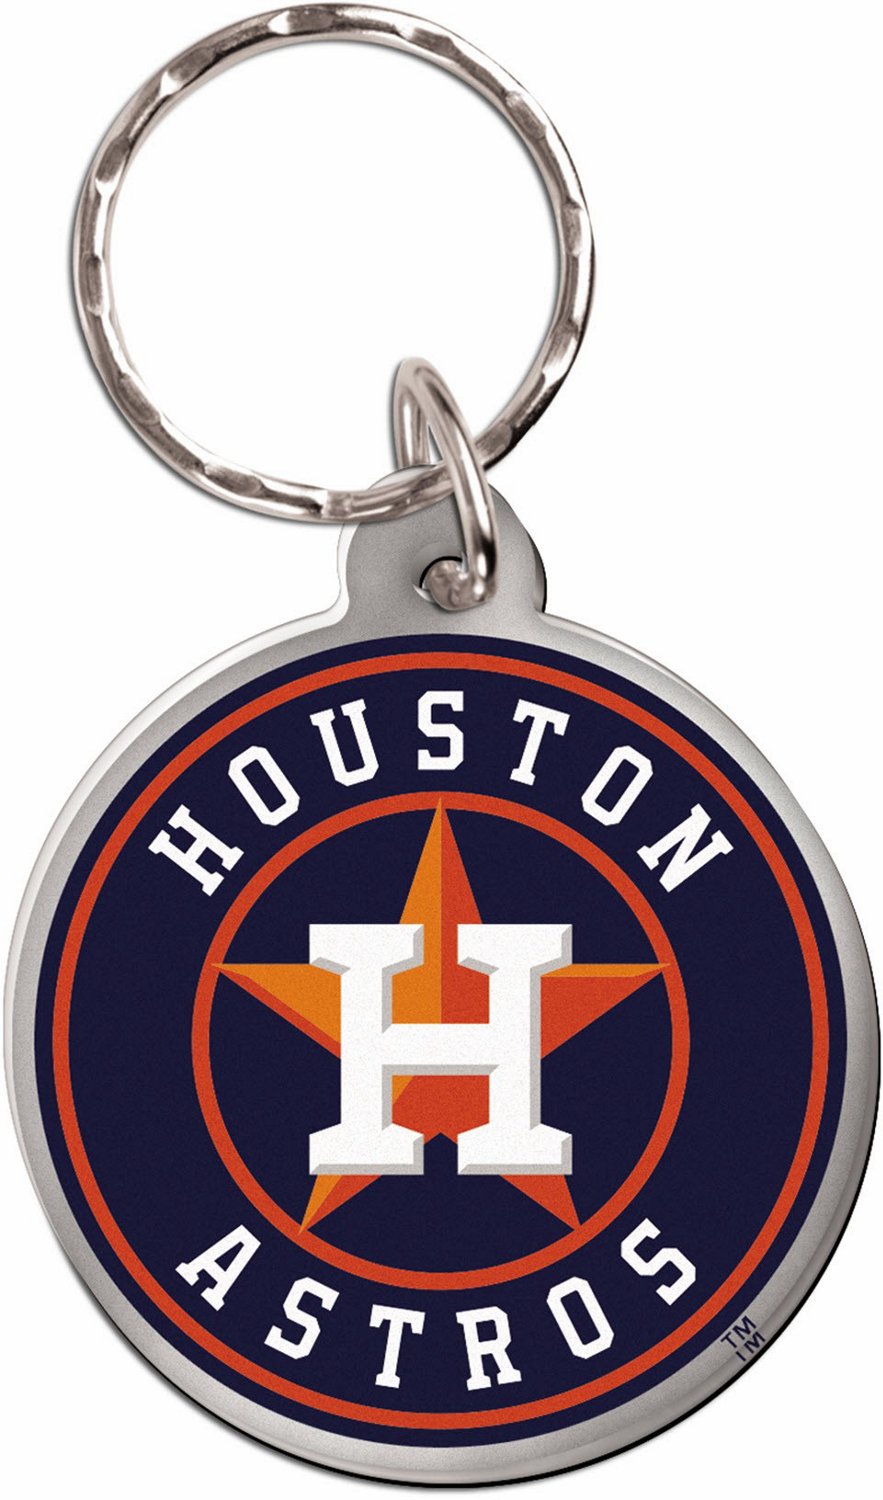 HOUSTON ASTROS FAN COLLECTION-Fan Collection-Championship Key Ring